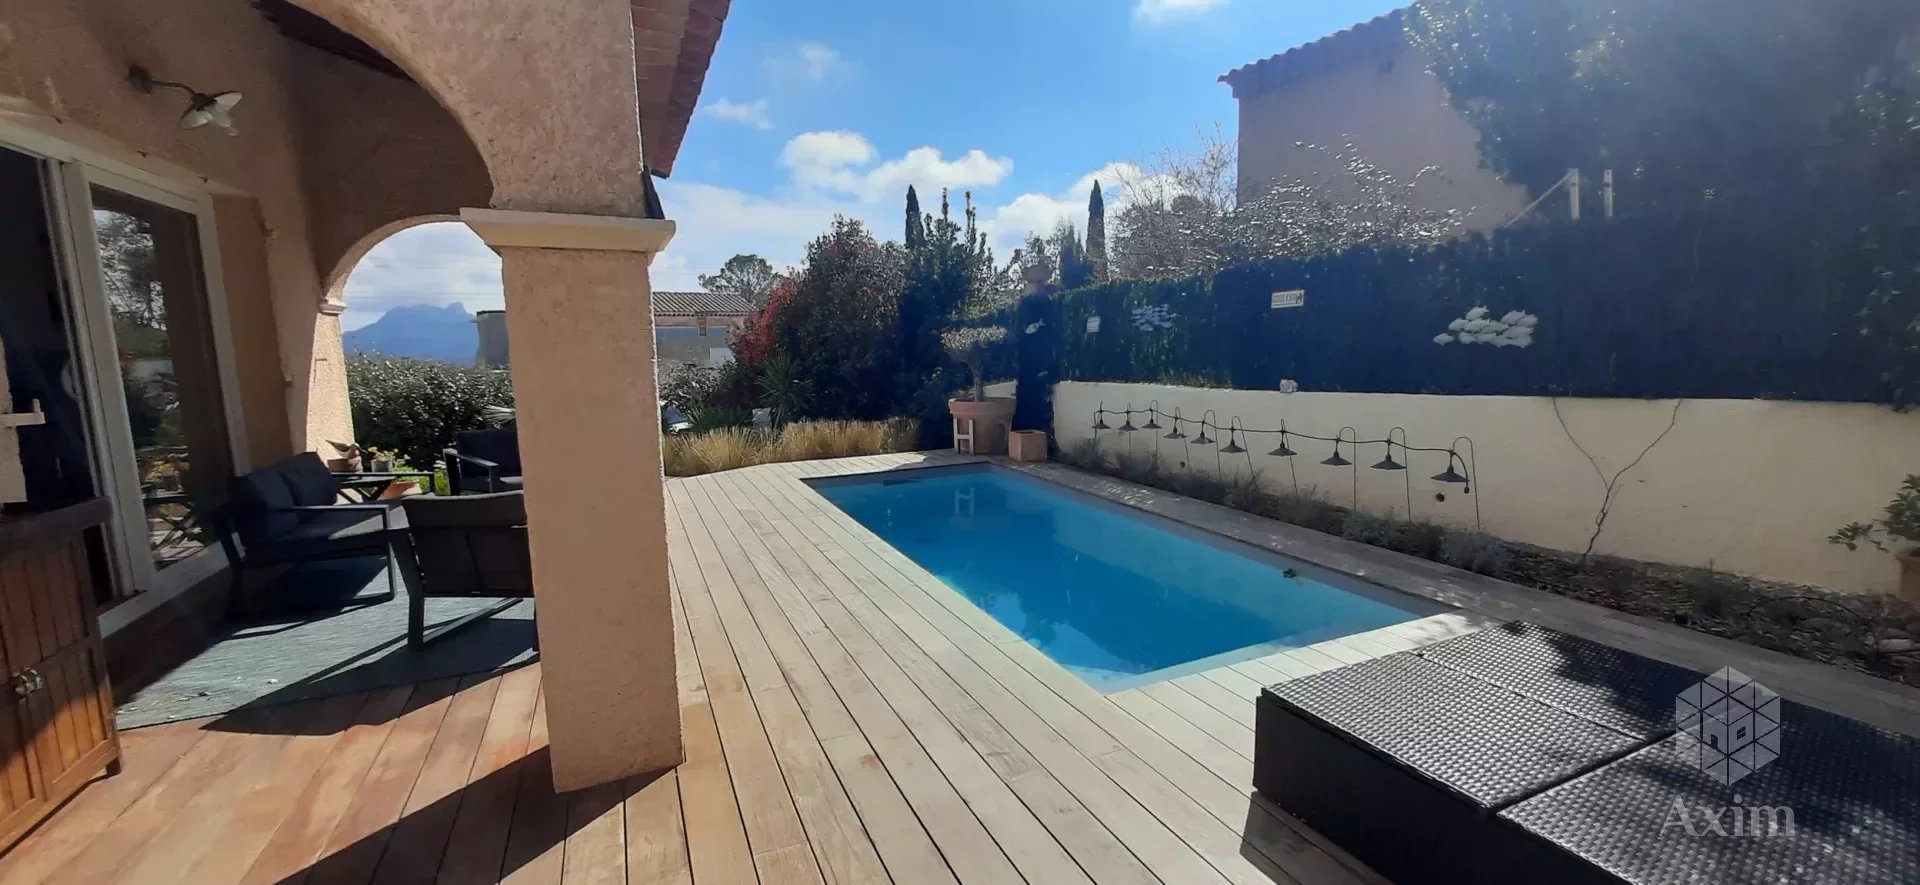 Villa 3/4 bedrooms with heated pool ideally located!